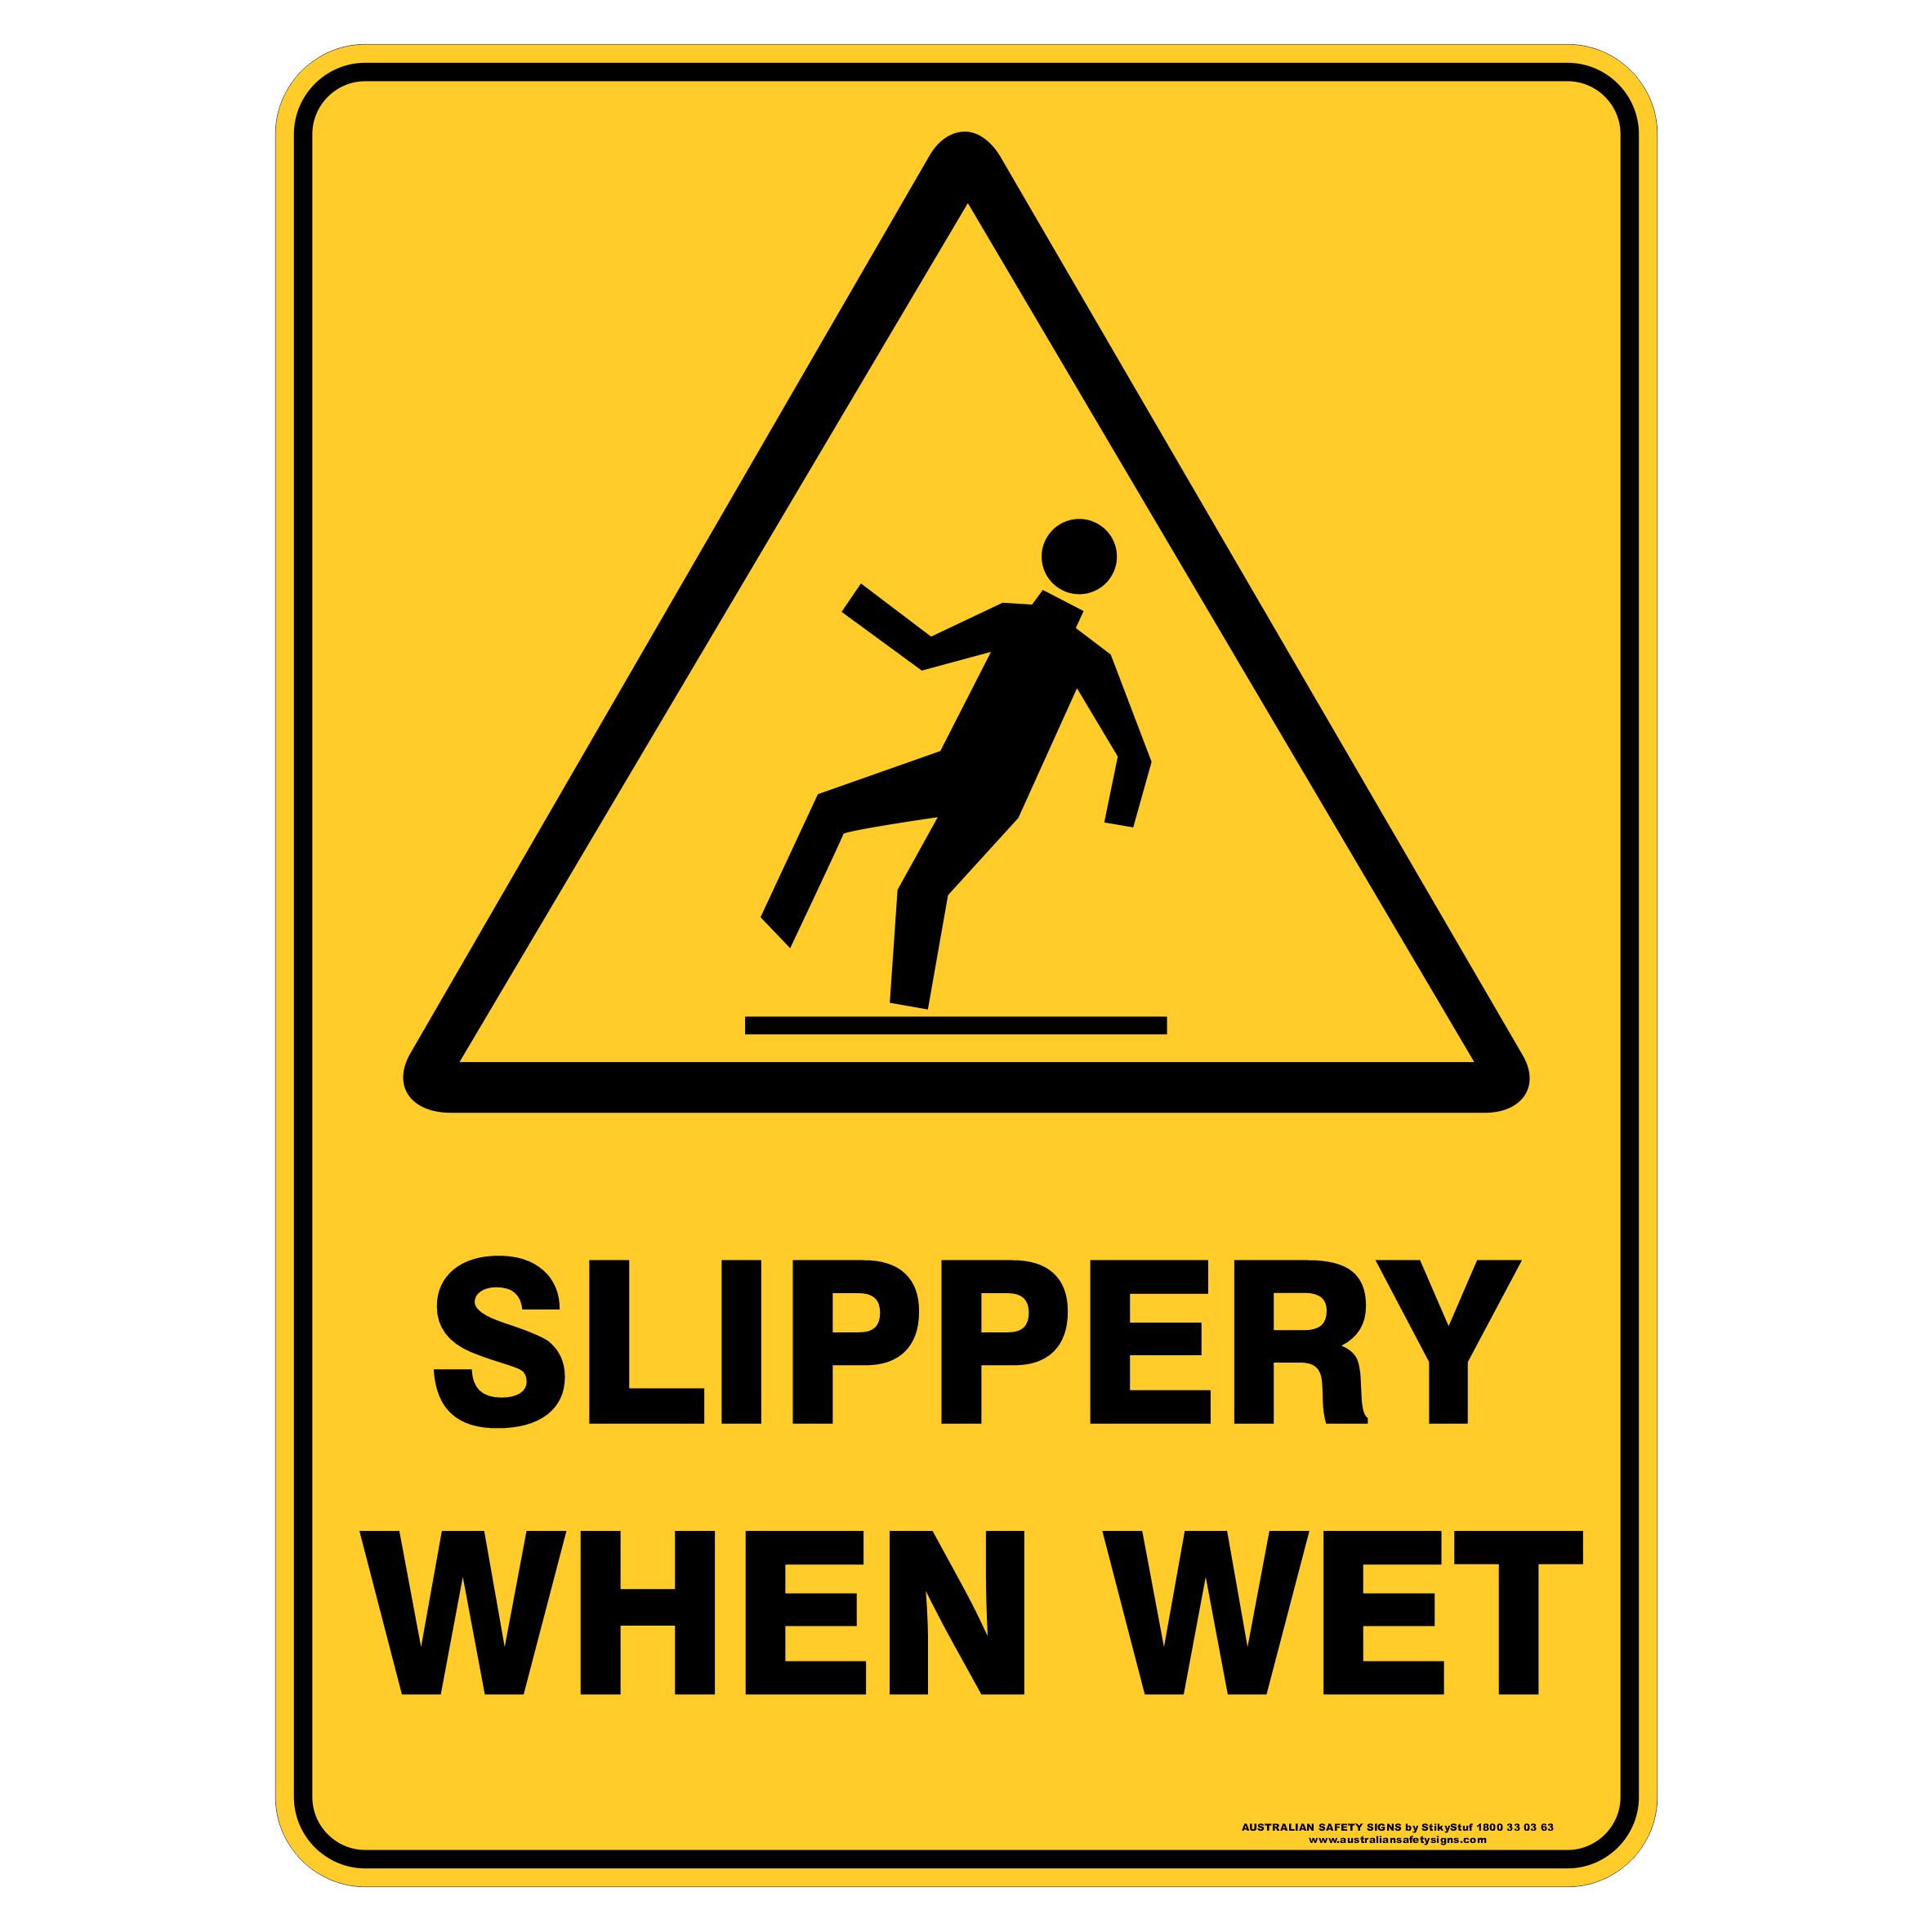 Slippery when wet - Safety Sign